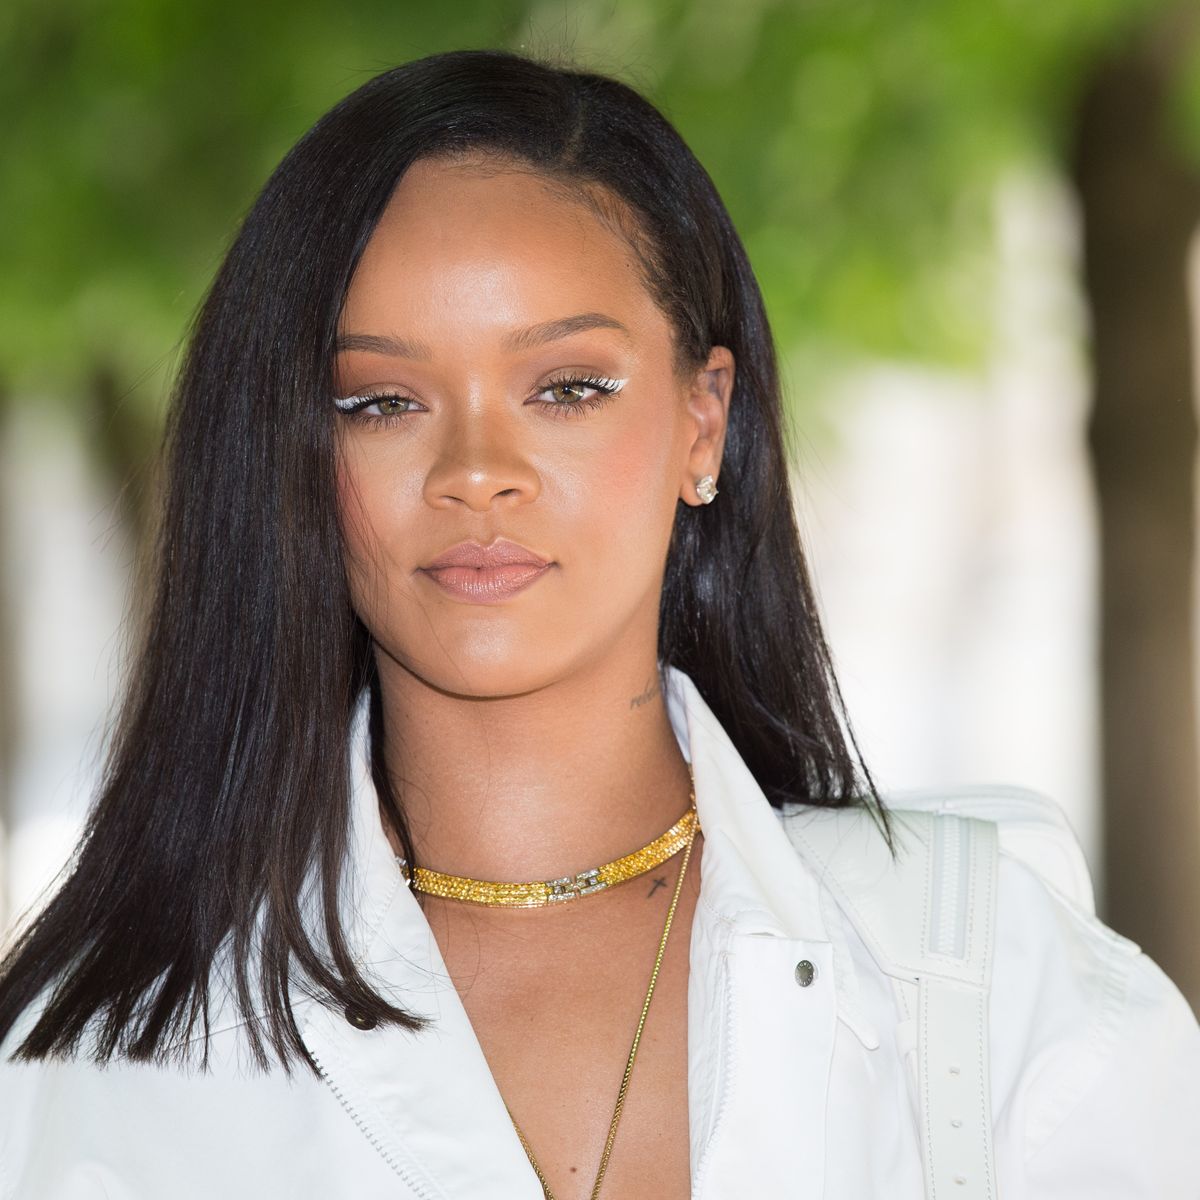 Rihanna Is Now the First Black Woman to Launch a Luxury Fashion